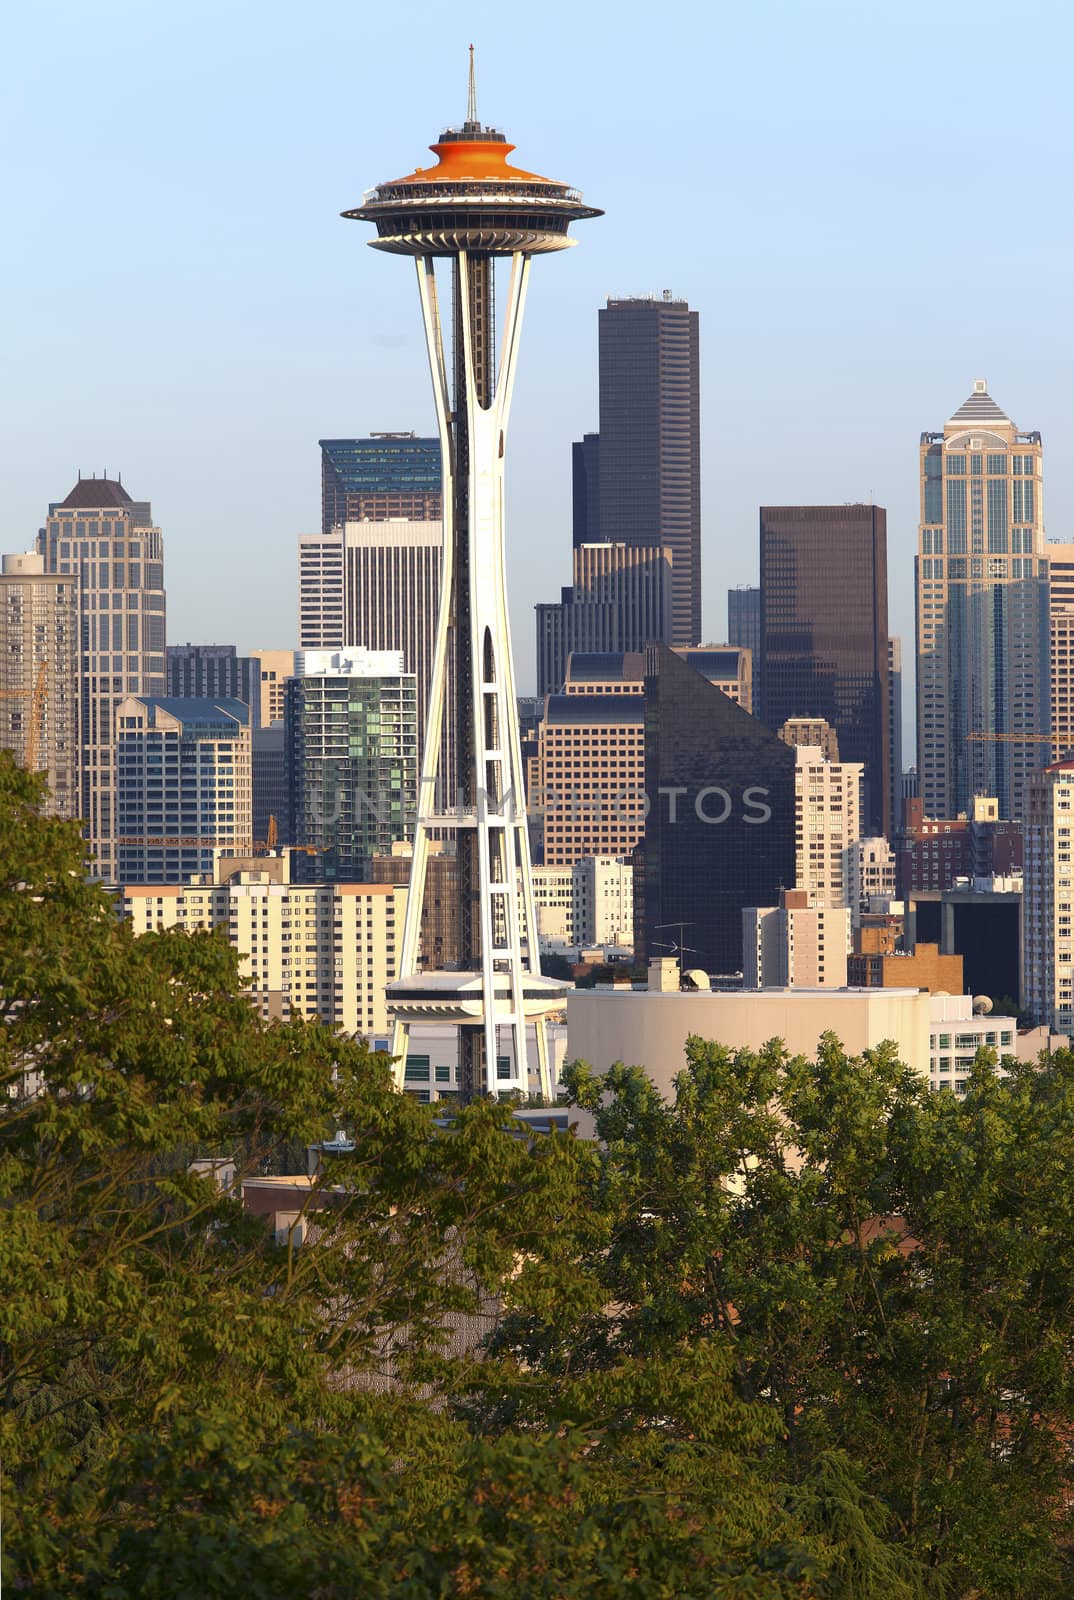 Seattle space needle tower and skyline buildings.